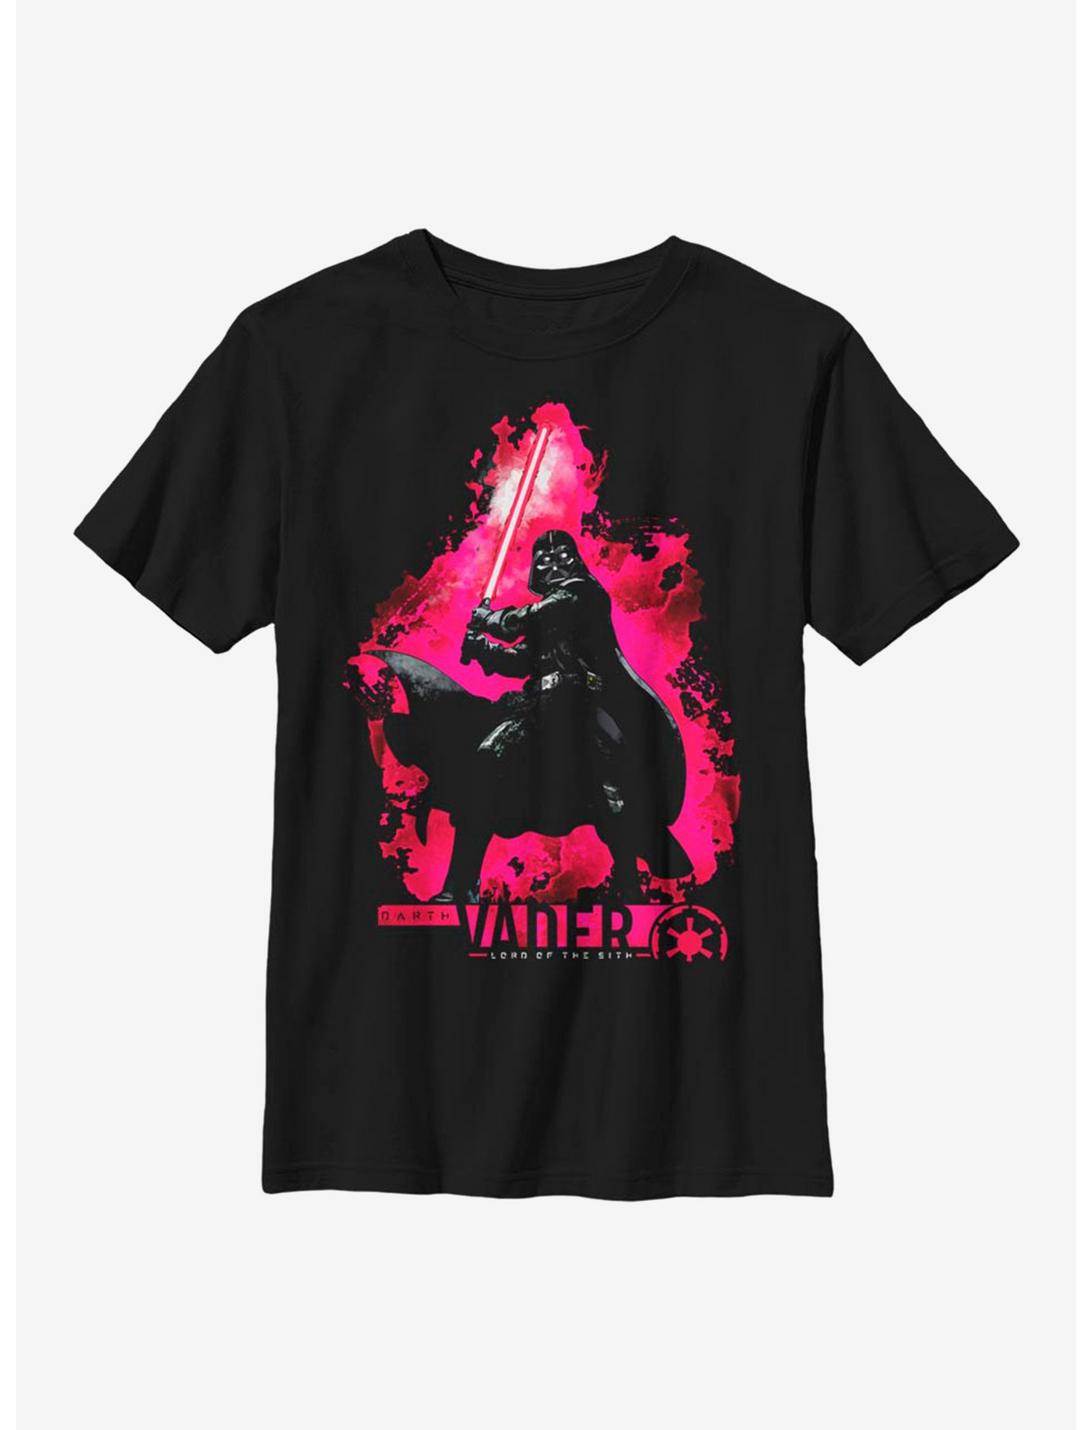 Star Wars Lord of the Sith Youth T-Shirt, BLACK, hi-res